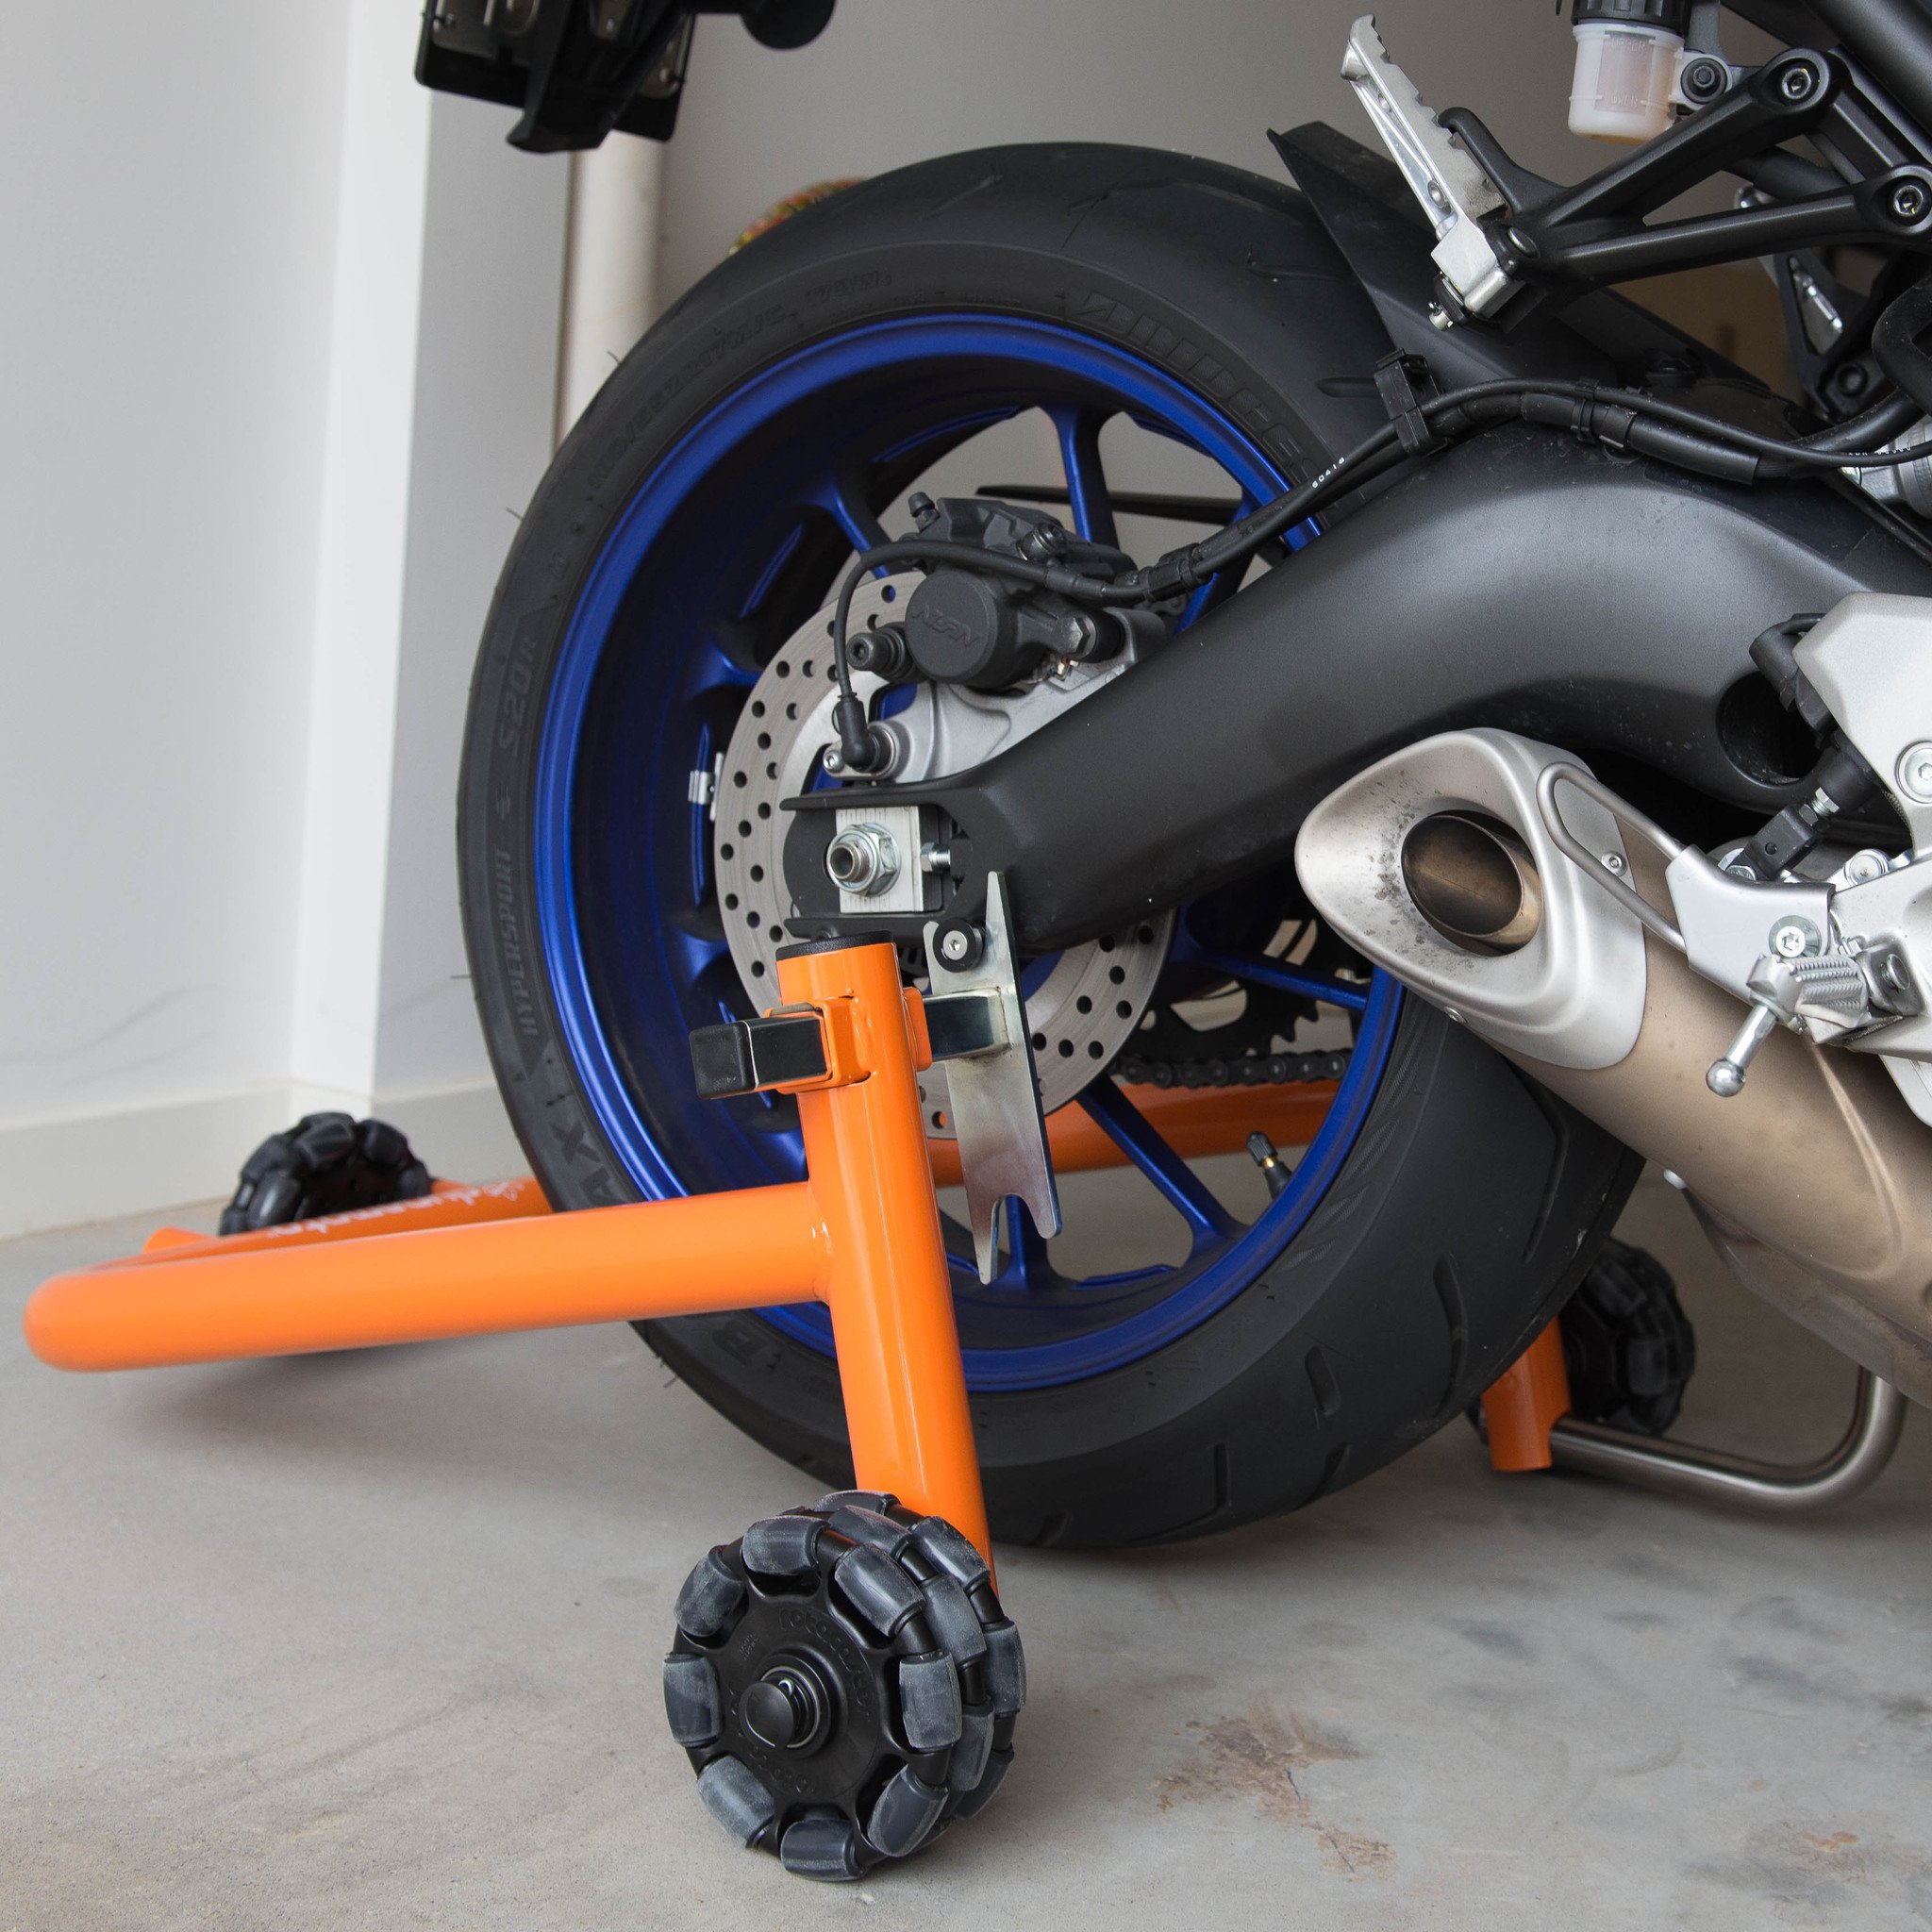 Motorcycle stand photo